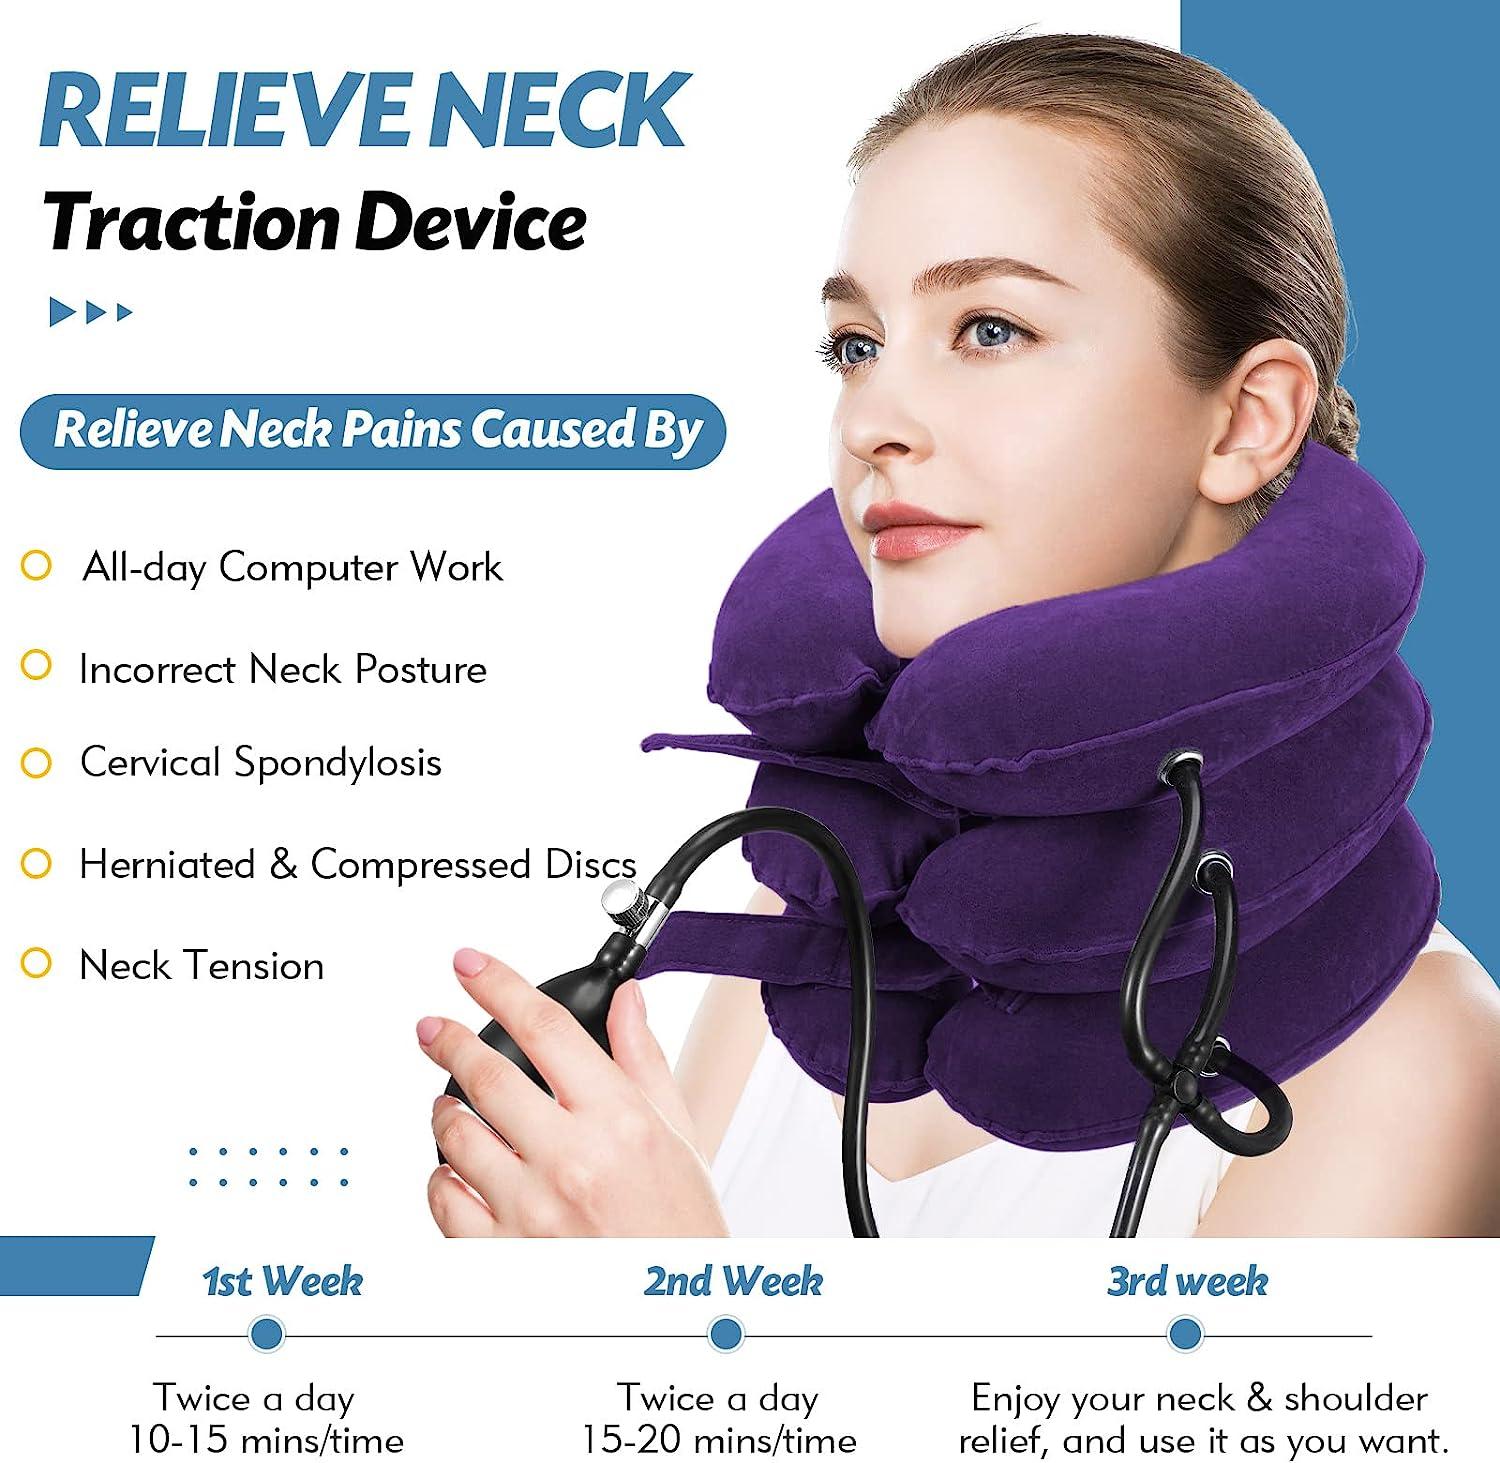 Cervical Neck Traction Device for Neck Pain Relief Adjustable Inflatable  Neck Stretcher Neck Brace Neck Traction Pillow for Neck Decompression and